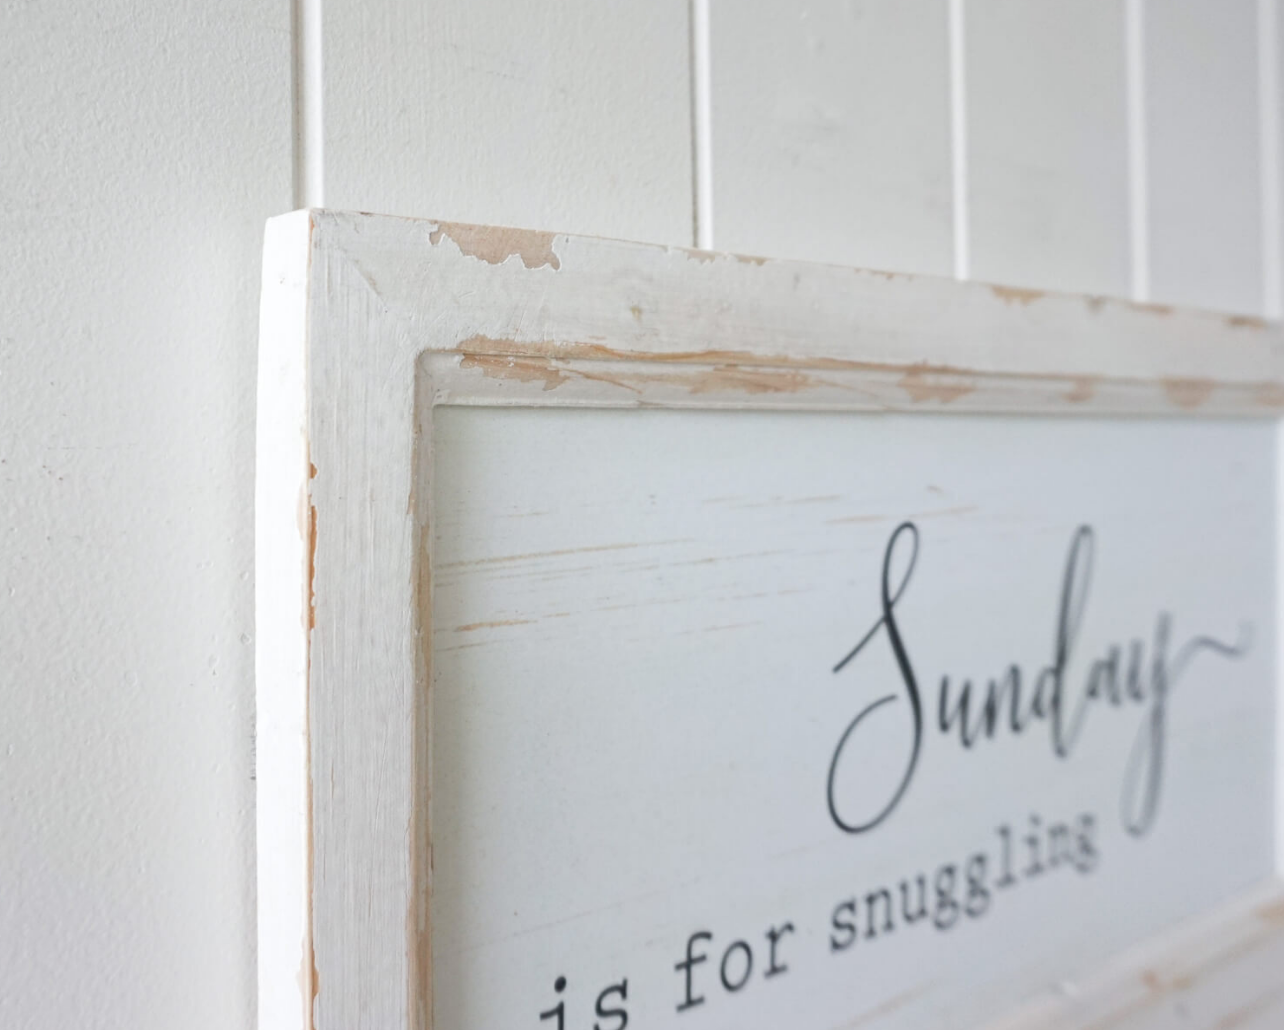 Sunday is for Snuggling Decor Sign